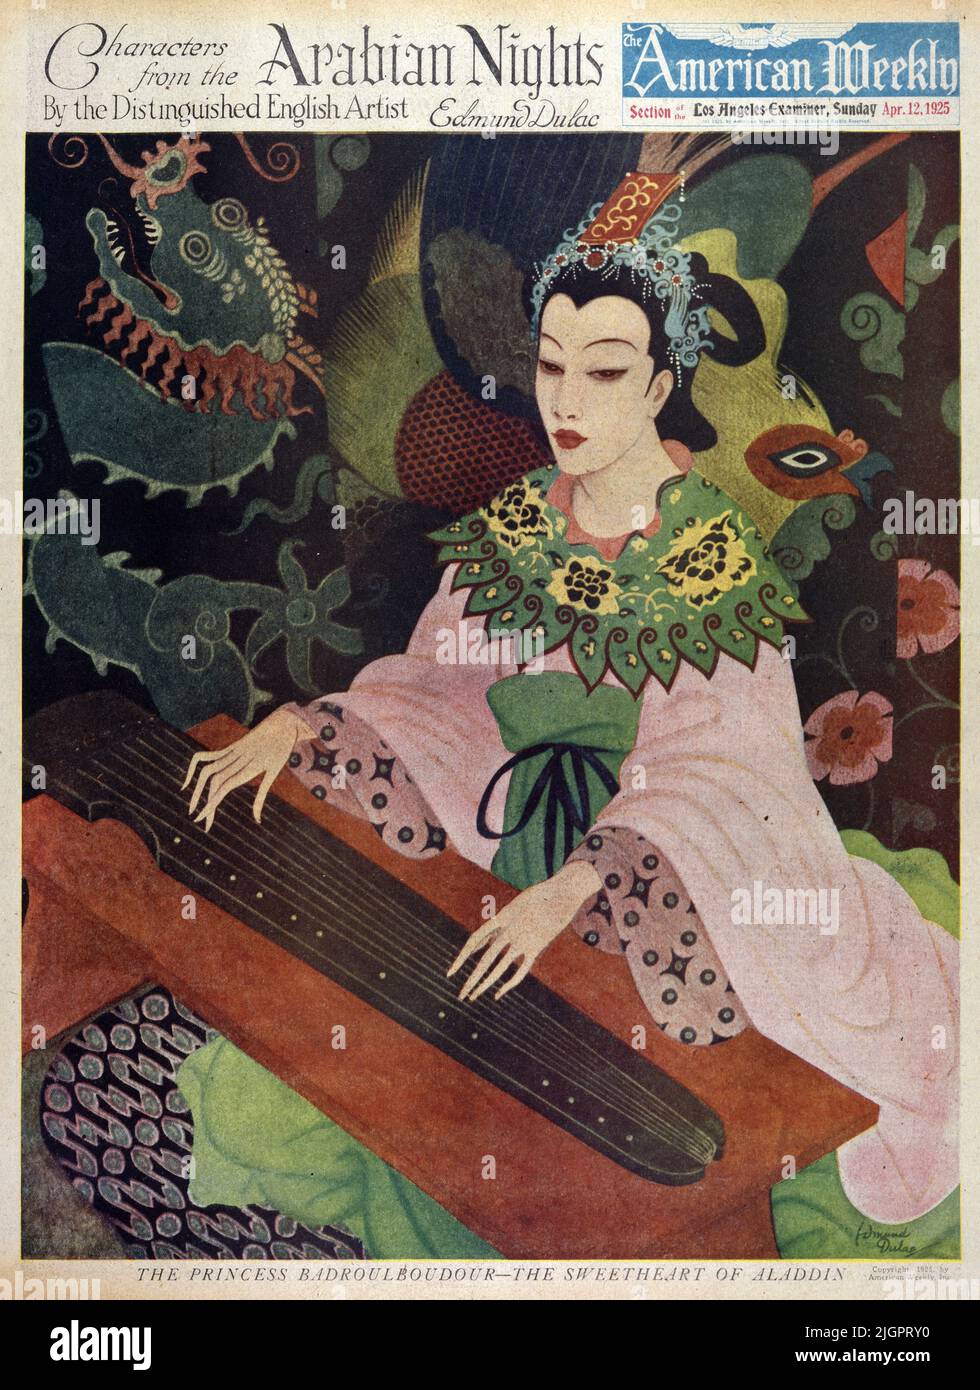 'The Princess Badroulboudour--The Sweetheart of Aladdin' published on April 12,1925 in the American Weekly Sunday magazine as part of the 'Characters from the Arabian Nights' series. Stock Photo